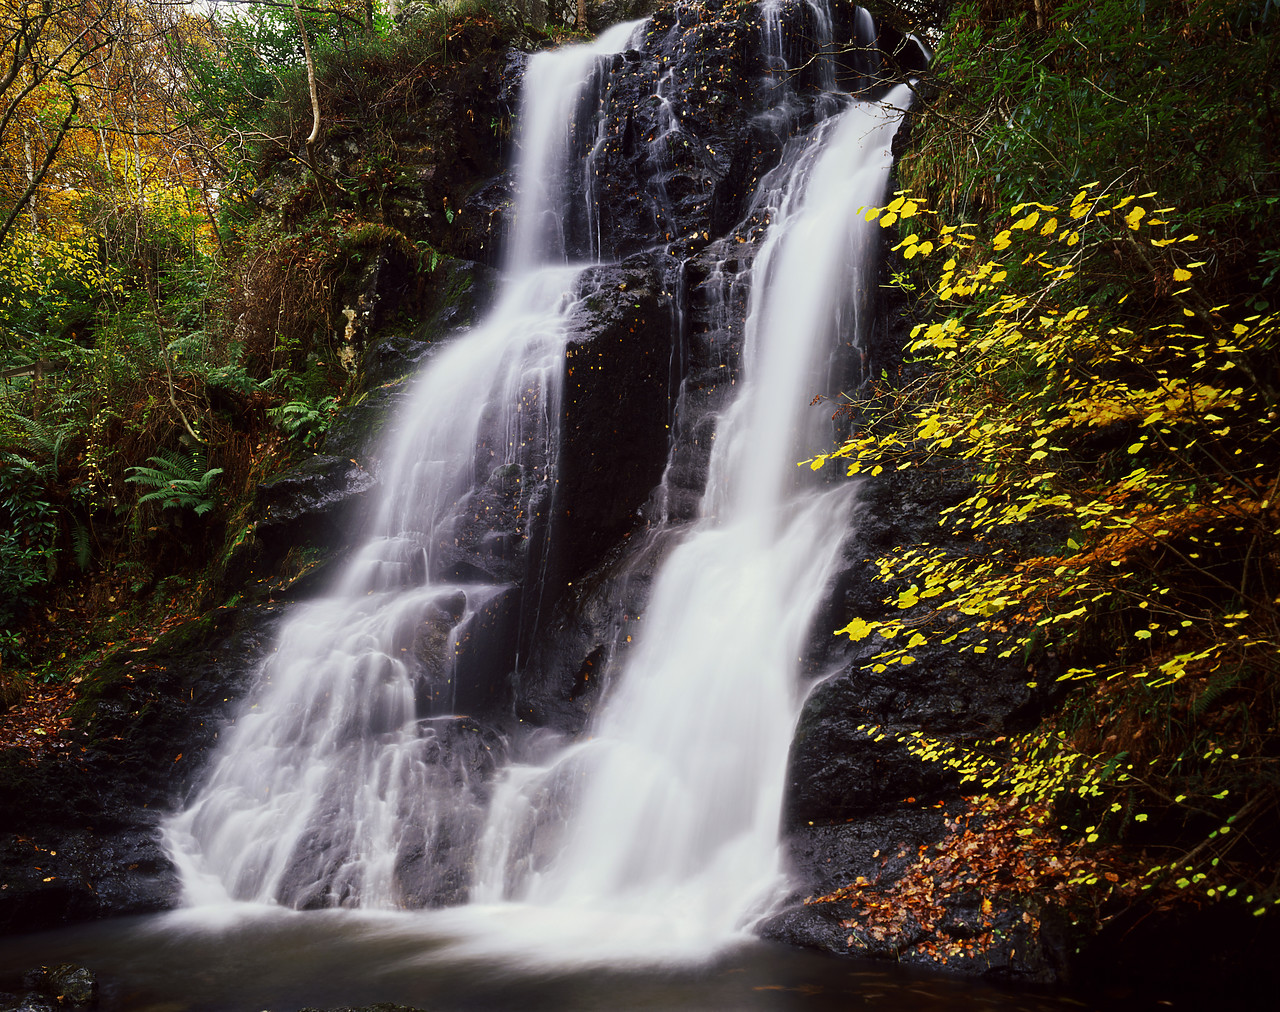 #030384-2 - Waterfall in Autumn, Lake District National Park, Cumbria, England